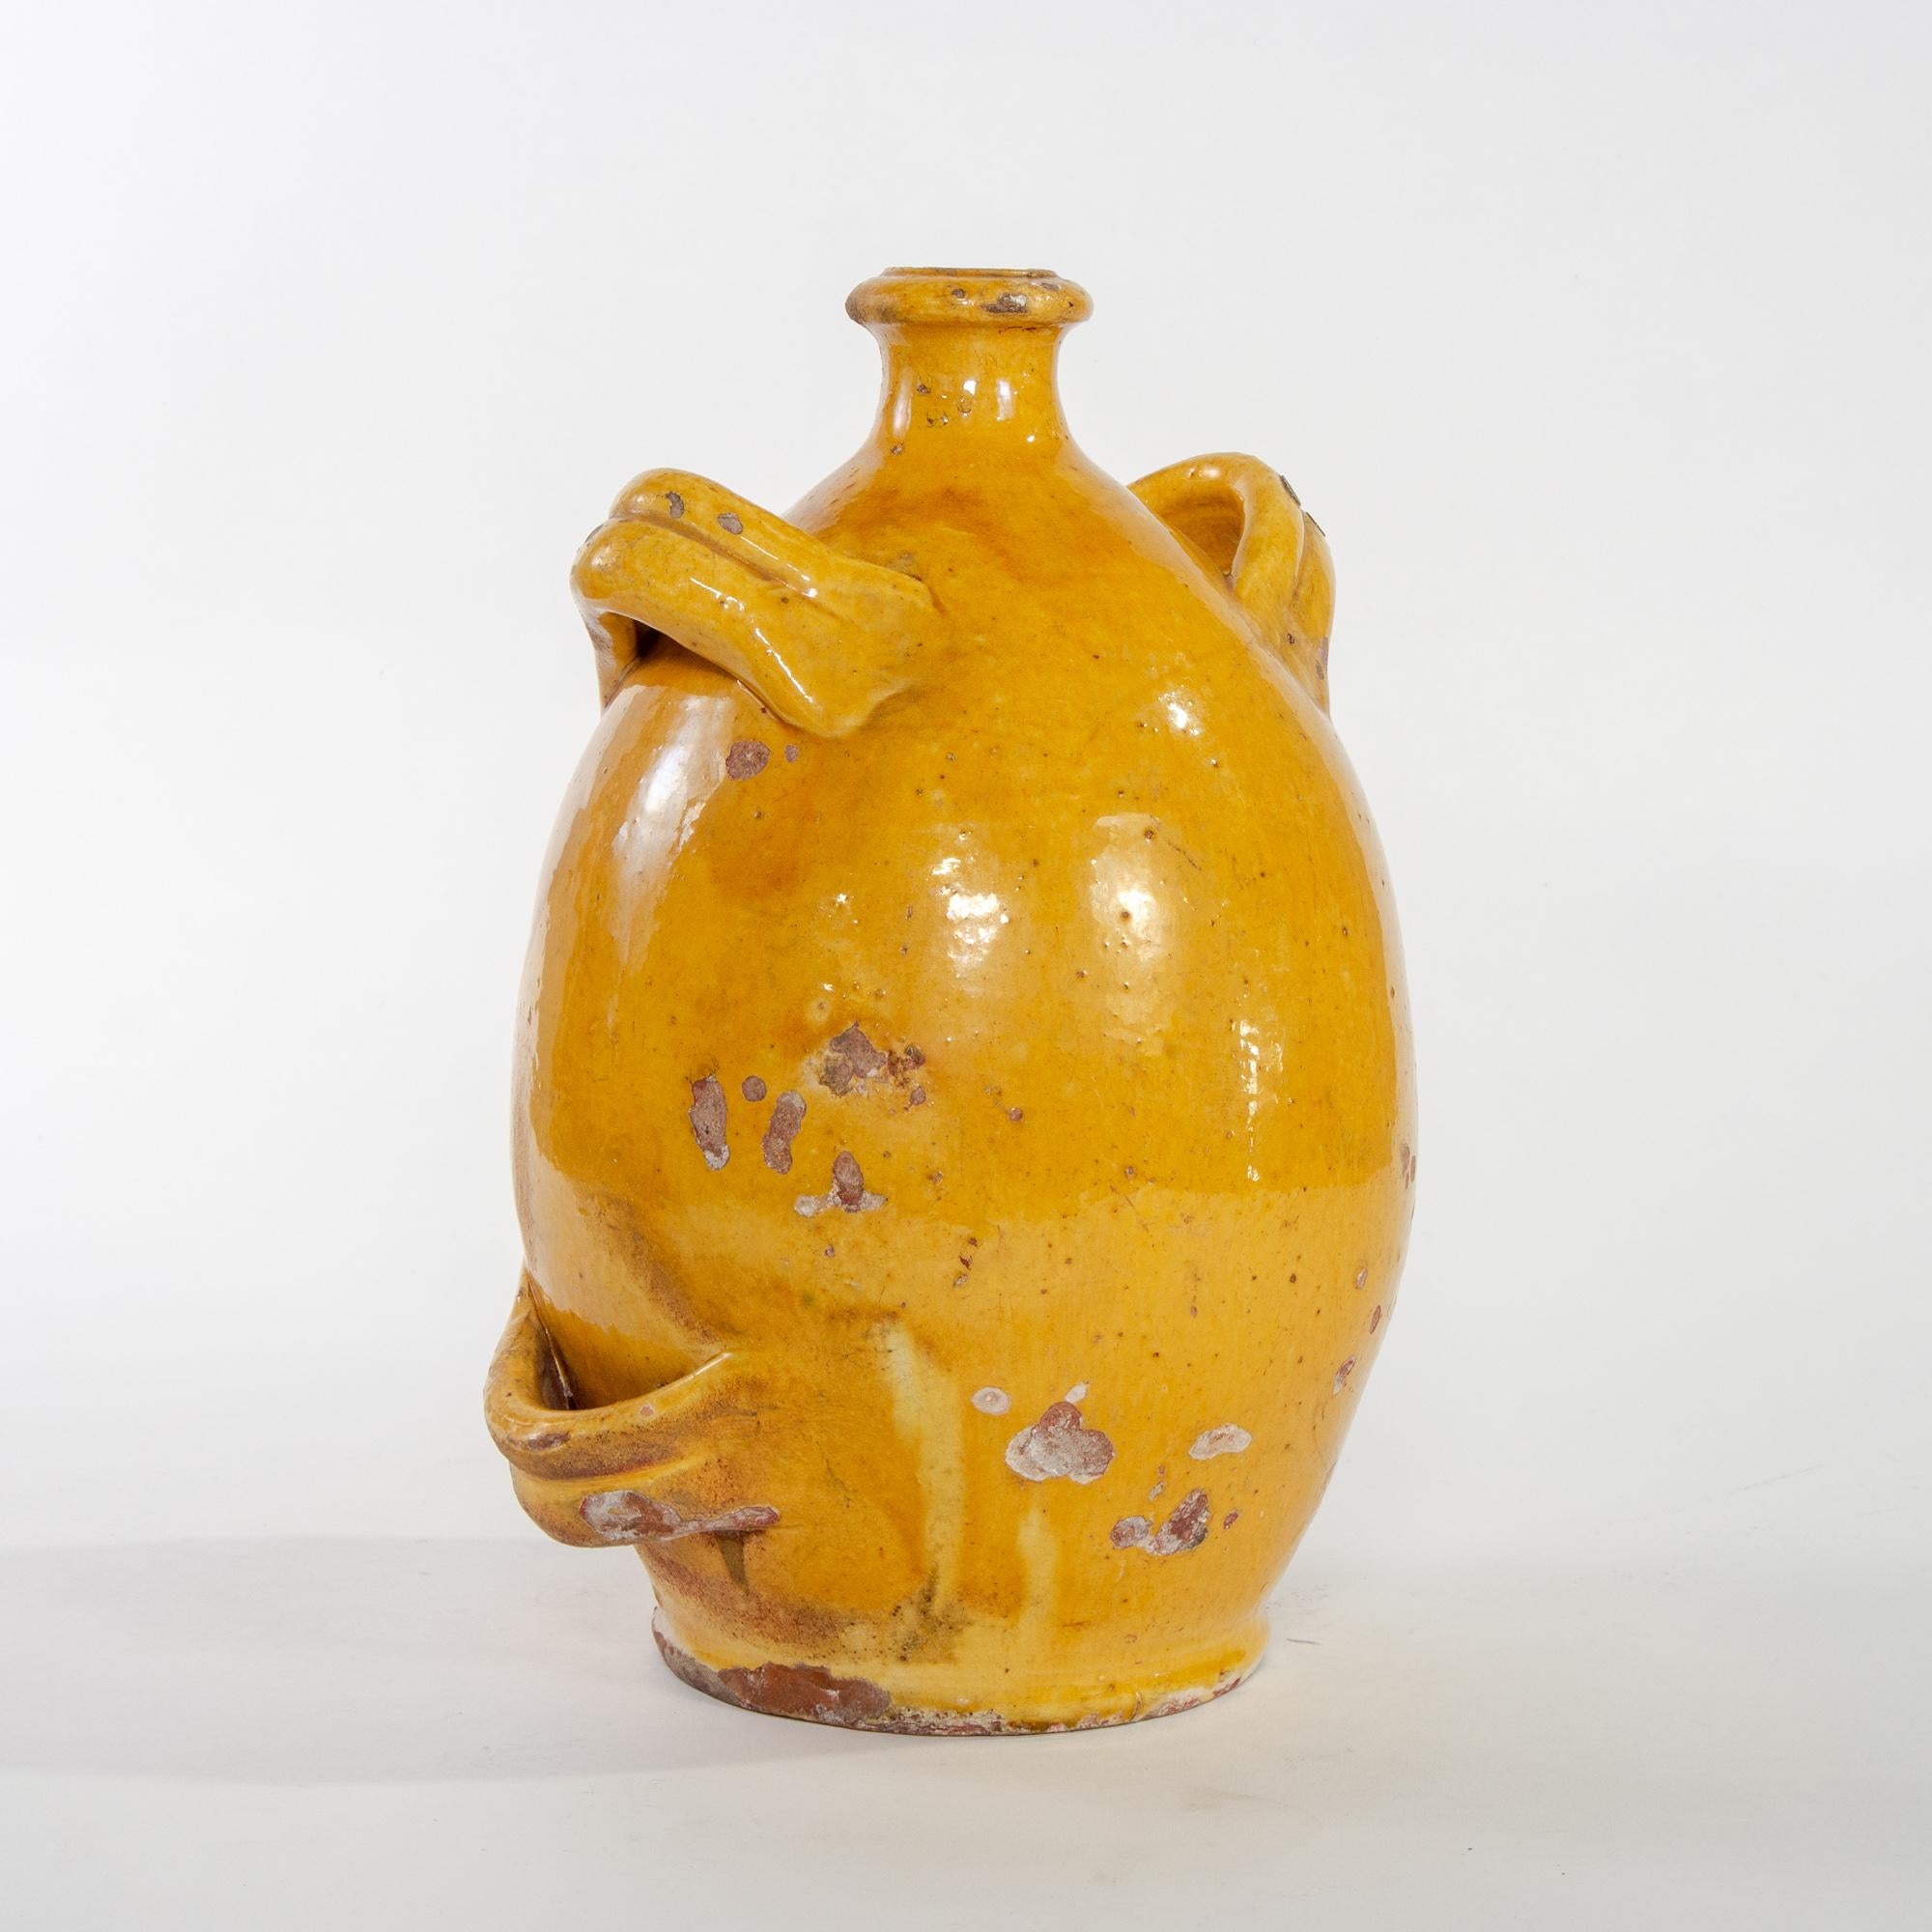 Ceramic Early 20th Century French Pottery Jug with Mustard Glaze